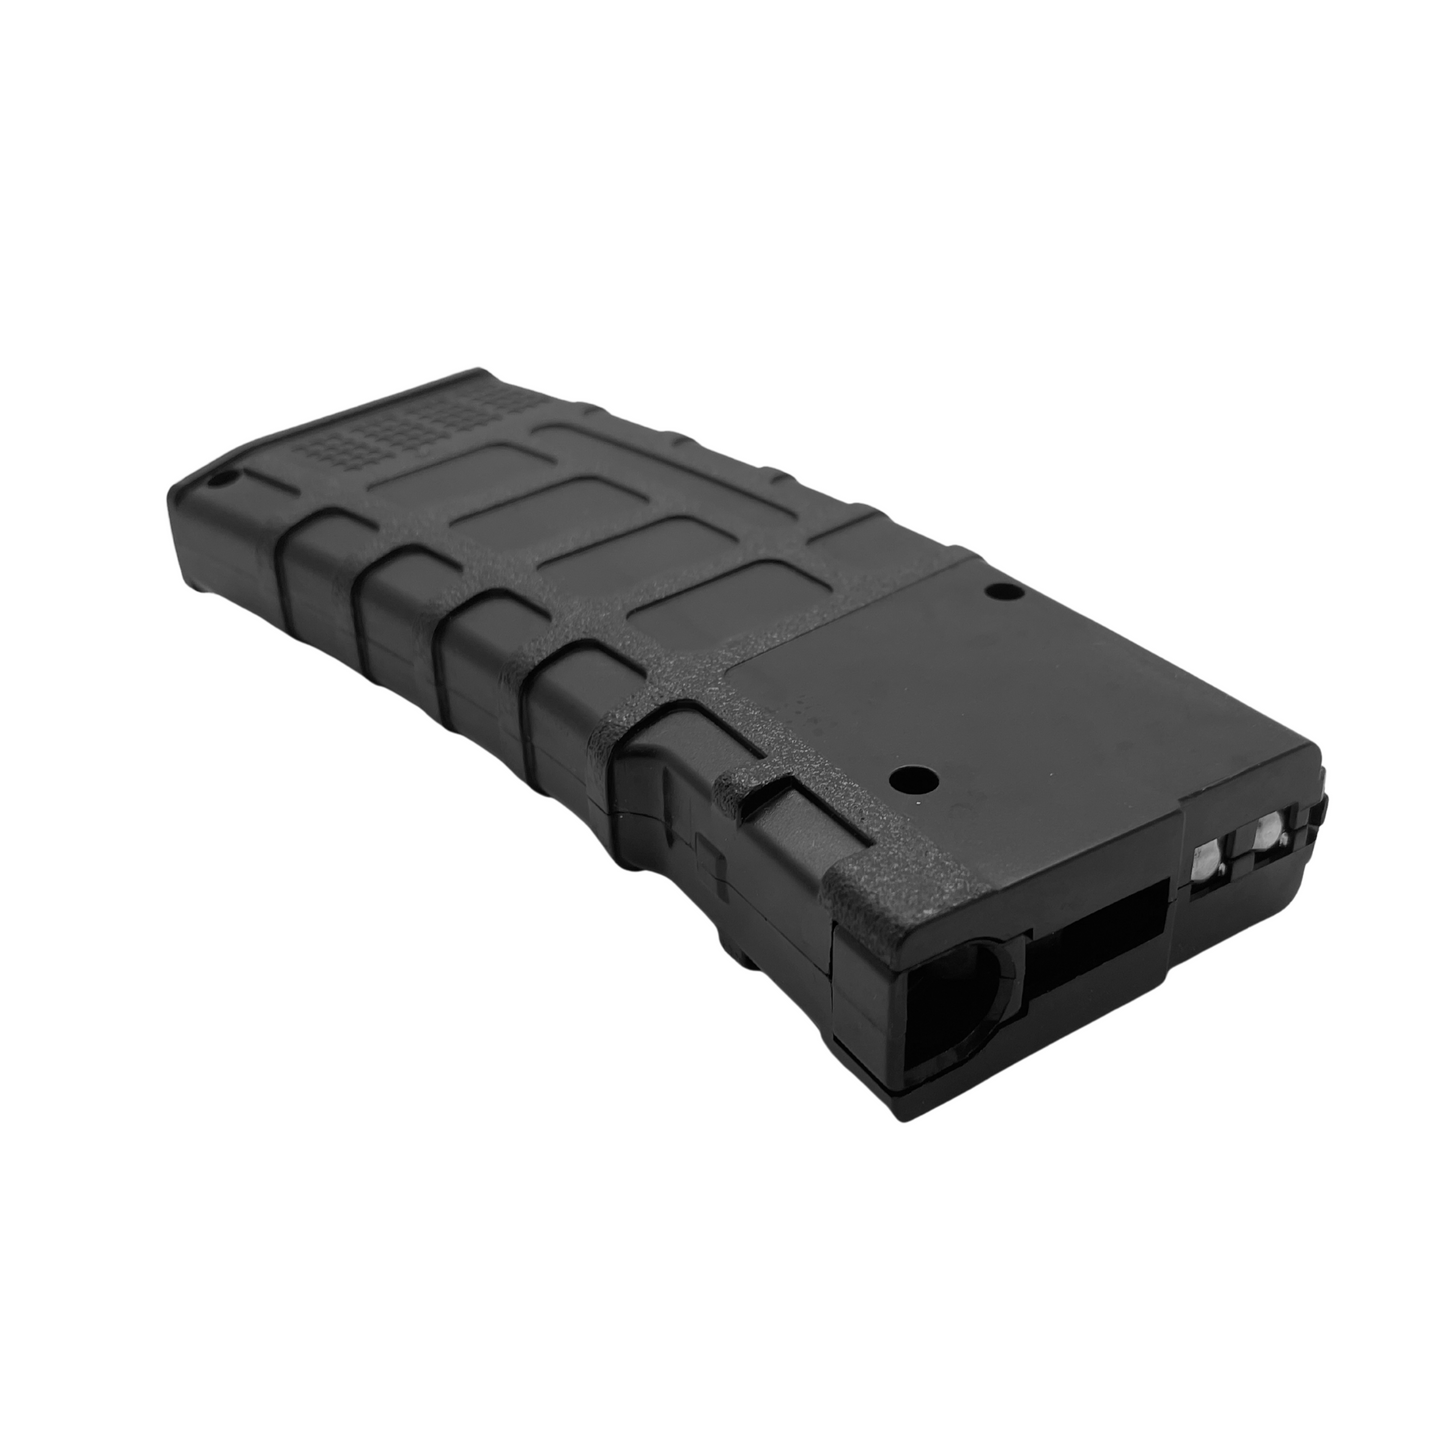 WELL M4 Magazine (Suited for metal blasters)